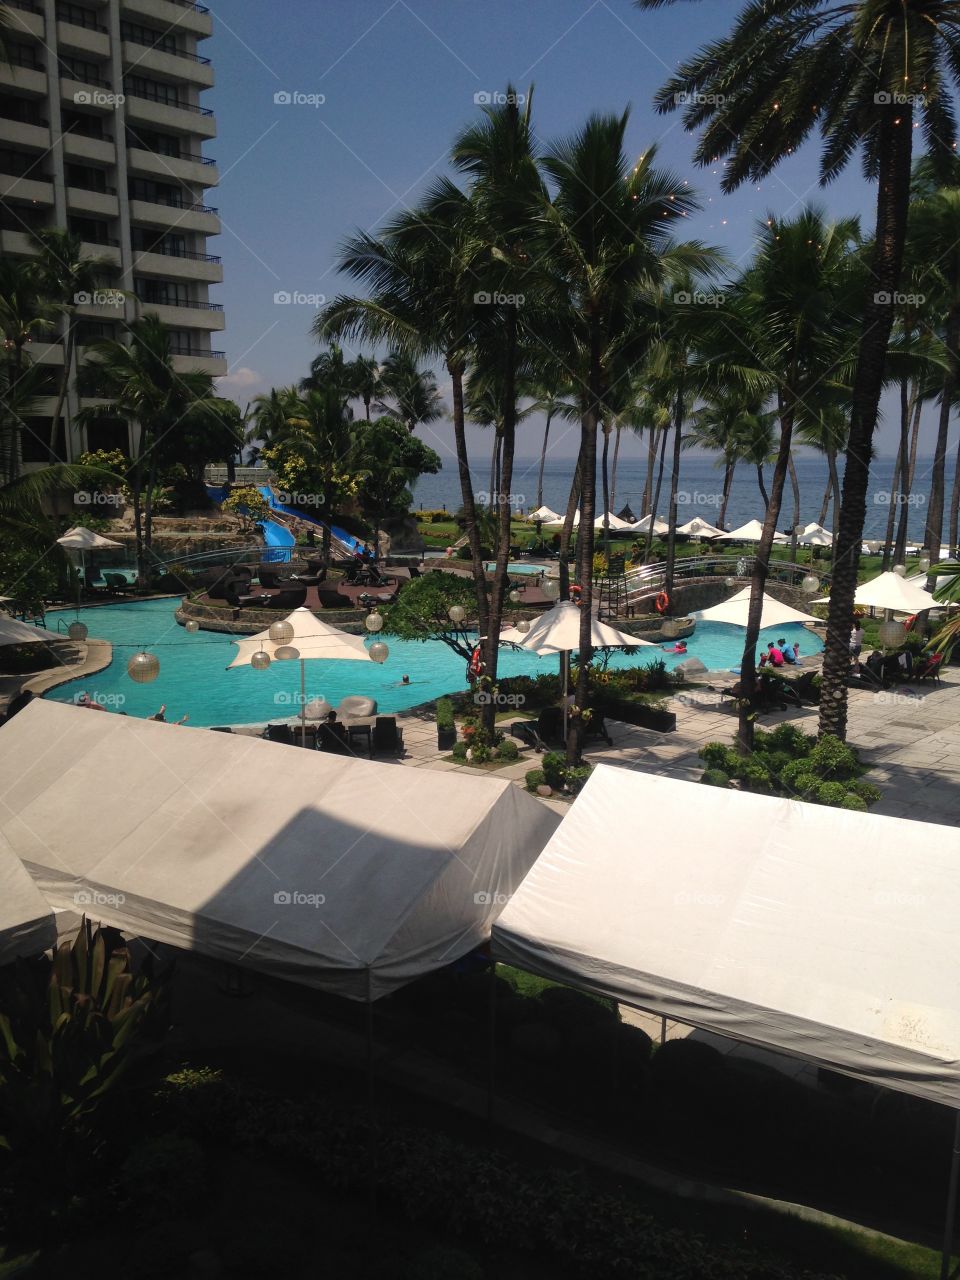 this is the poolside view of the hotel